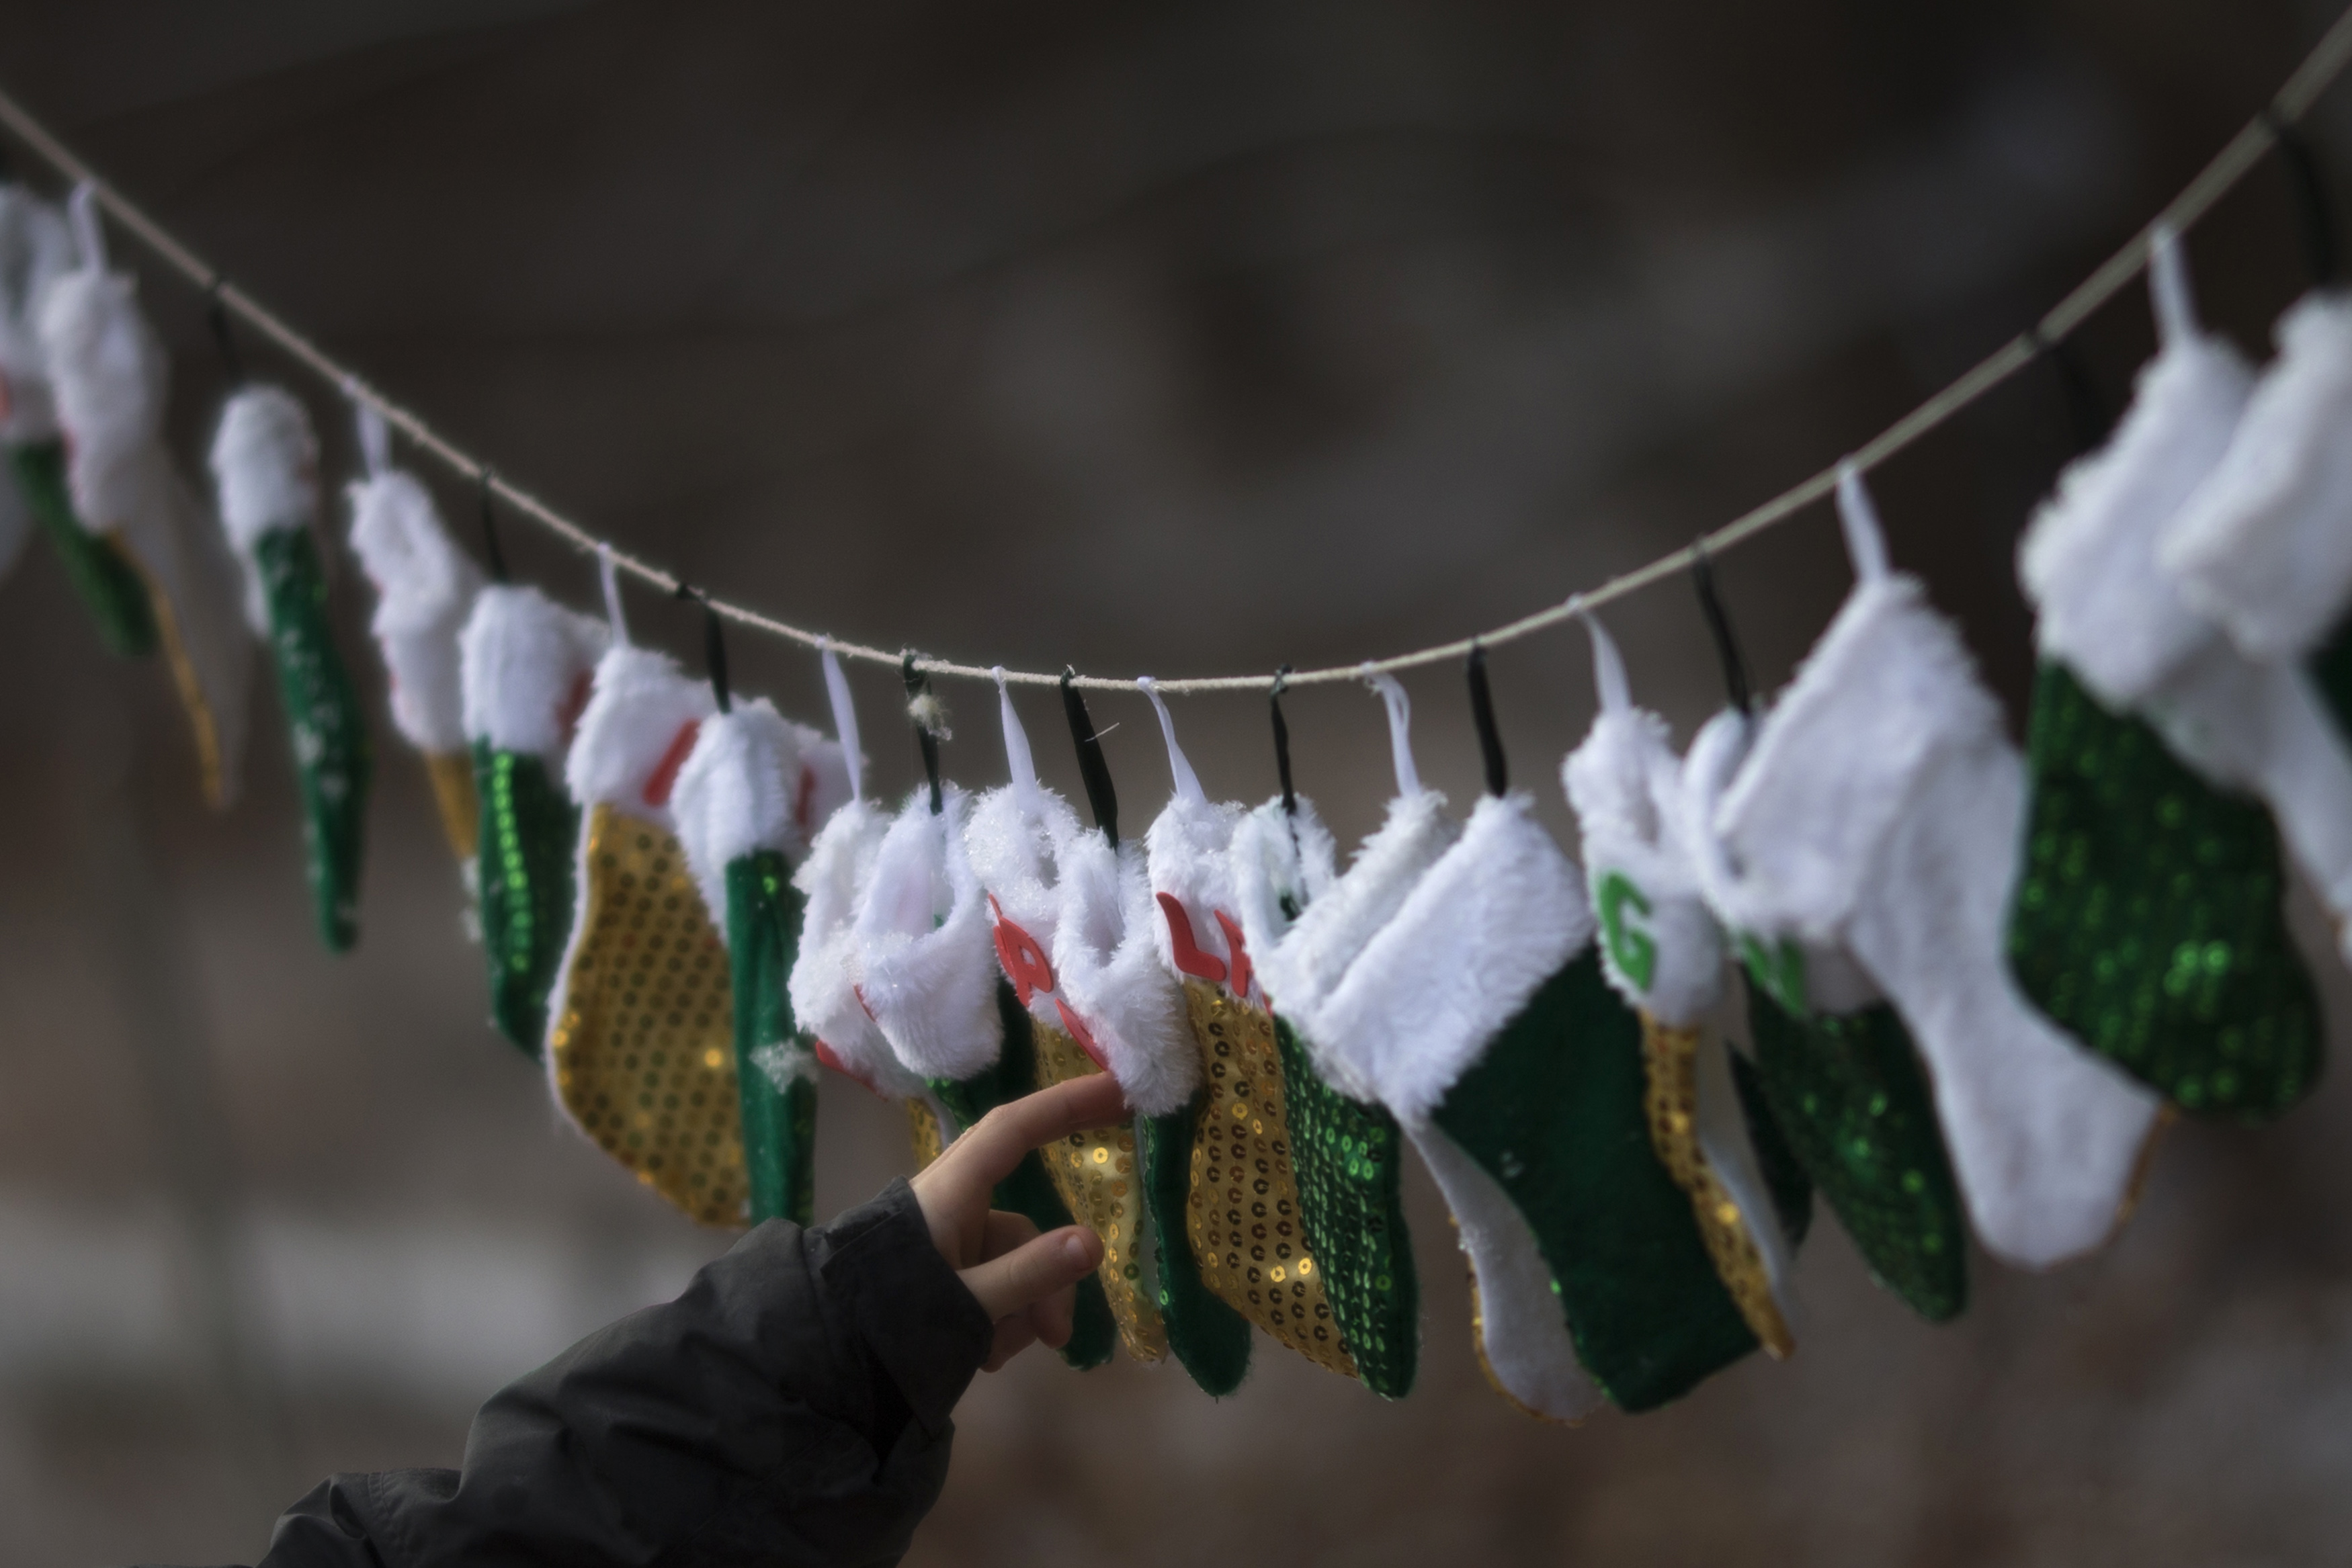 A boy touches stockings, representing those killed in the December 14 shootings at Sandy Hook Elementary School, on Christmas morning in Sandy Hook Village in Newtown, Connecticut